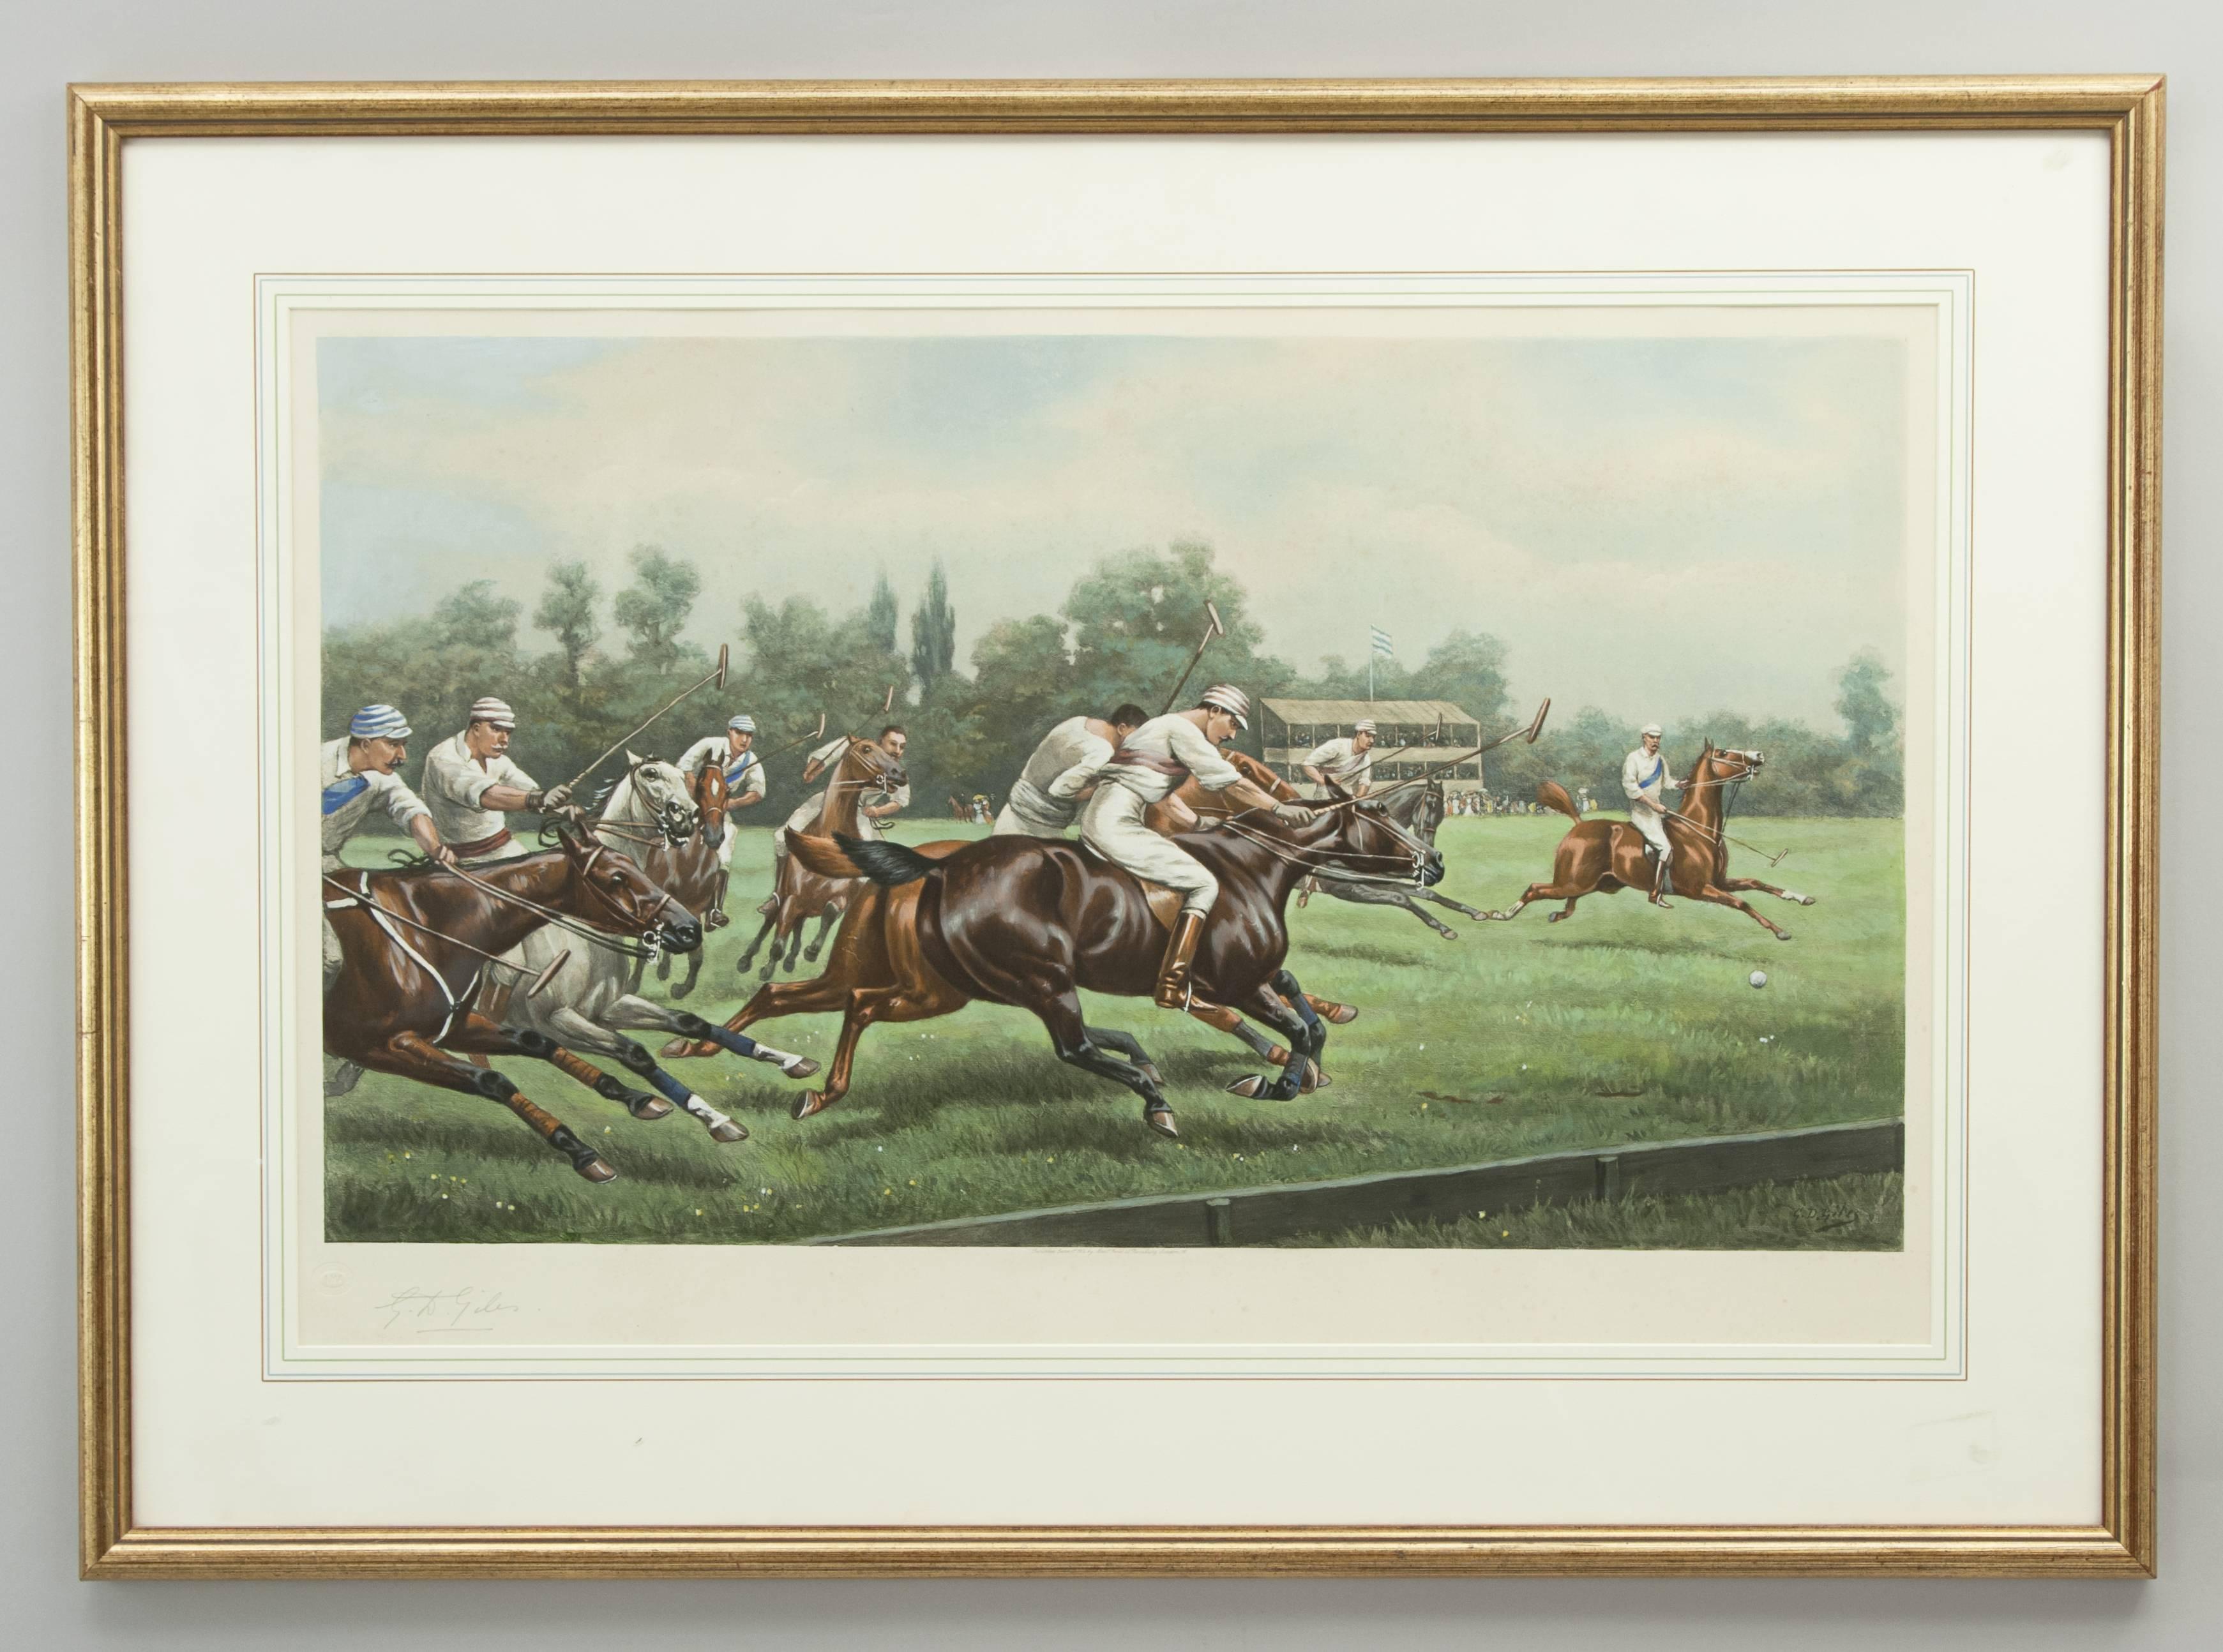 Polo at Hurlingham.
Large Polo picture 'Polo at Hurlingham' signed G.D. Giles. This is an original hand colored photogravure, only 100 signed proofs were issued. Published June 1st 1904 by Messrs Fores, 41 Piccadilly, London, W.
The picture by